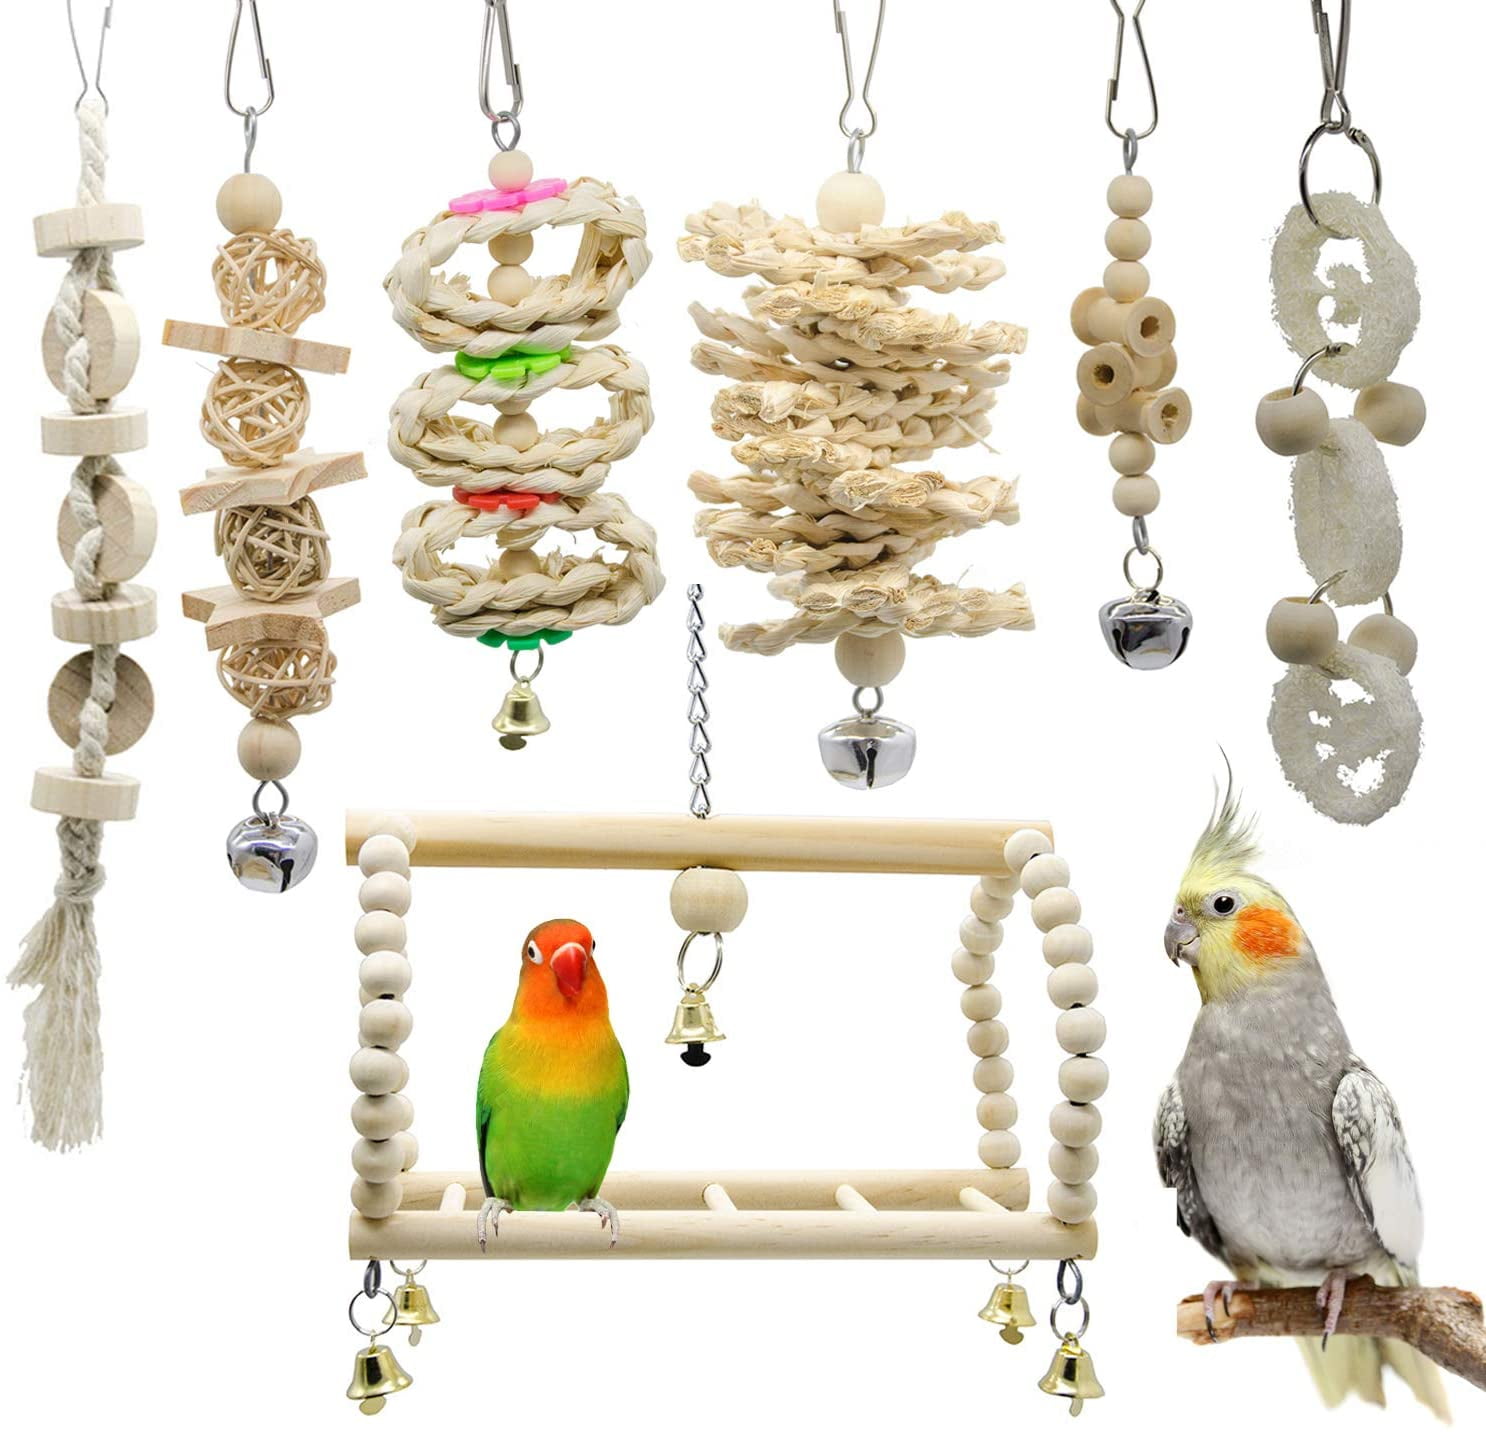 SHINYLYL 7Packs Bird Parrot Swing Chewing Toys-Hanging Bell Bird Cage Toys Suitable for Small Parakeets,Cockatiels Finches,Budgie,Macaws,Parrots,Love Birds 